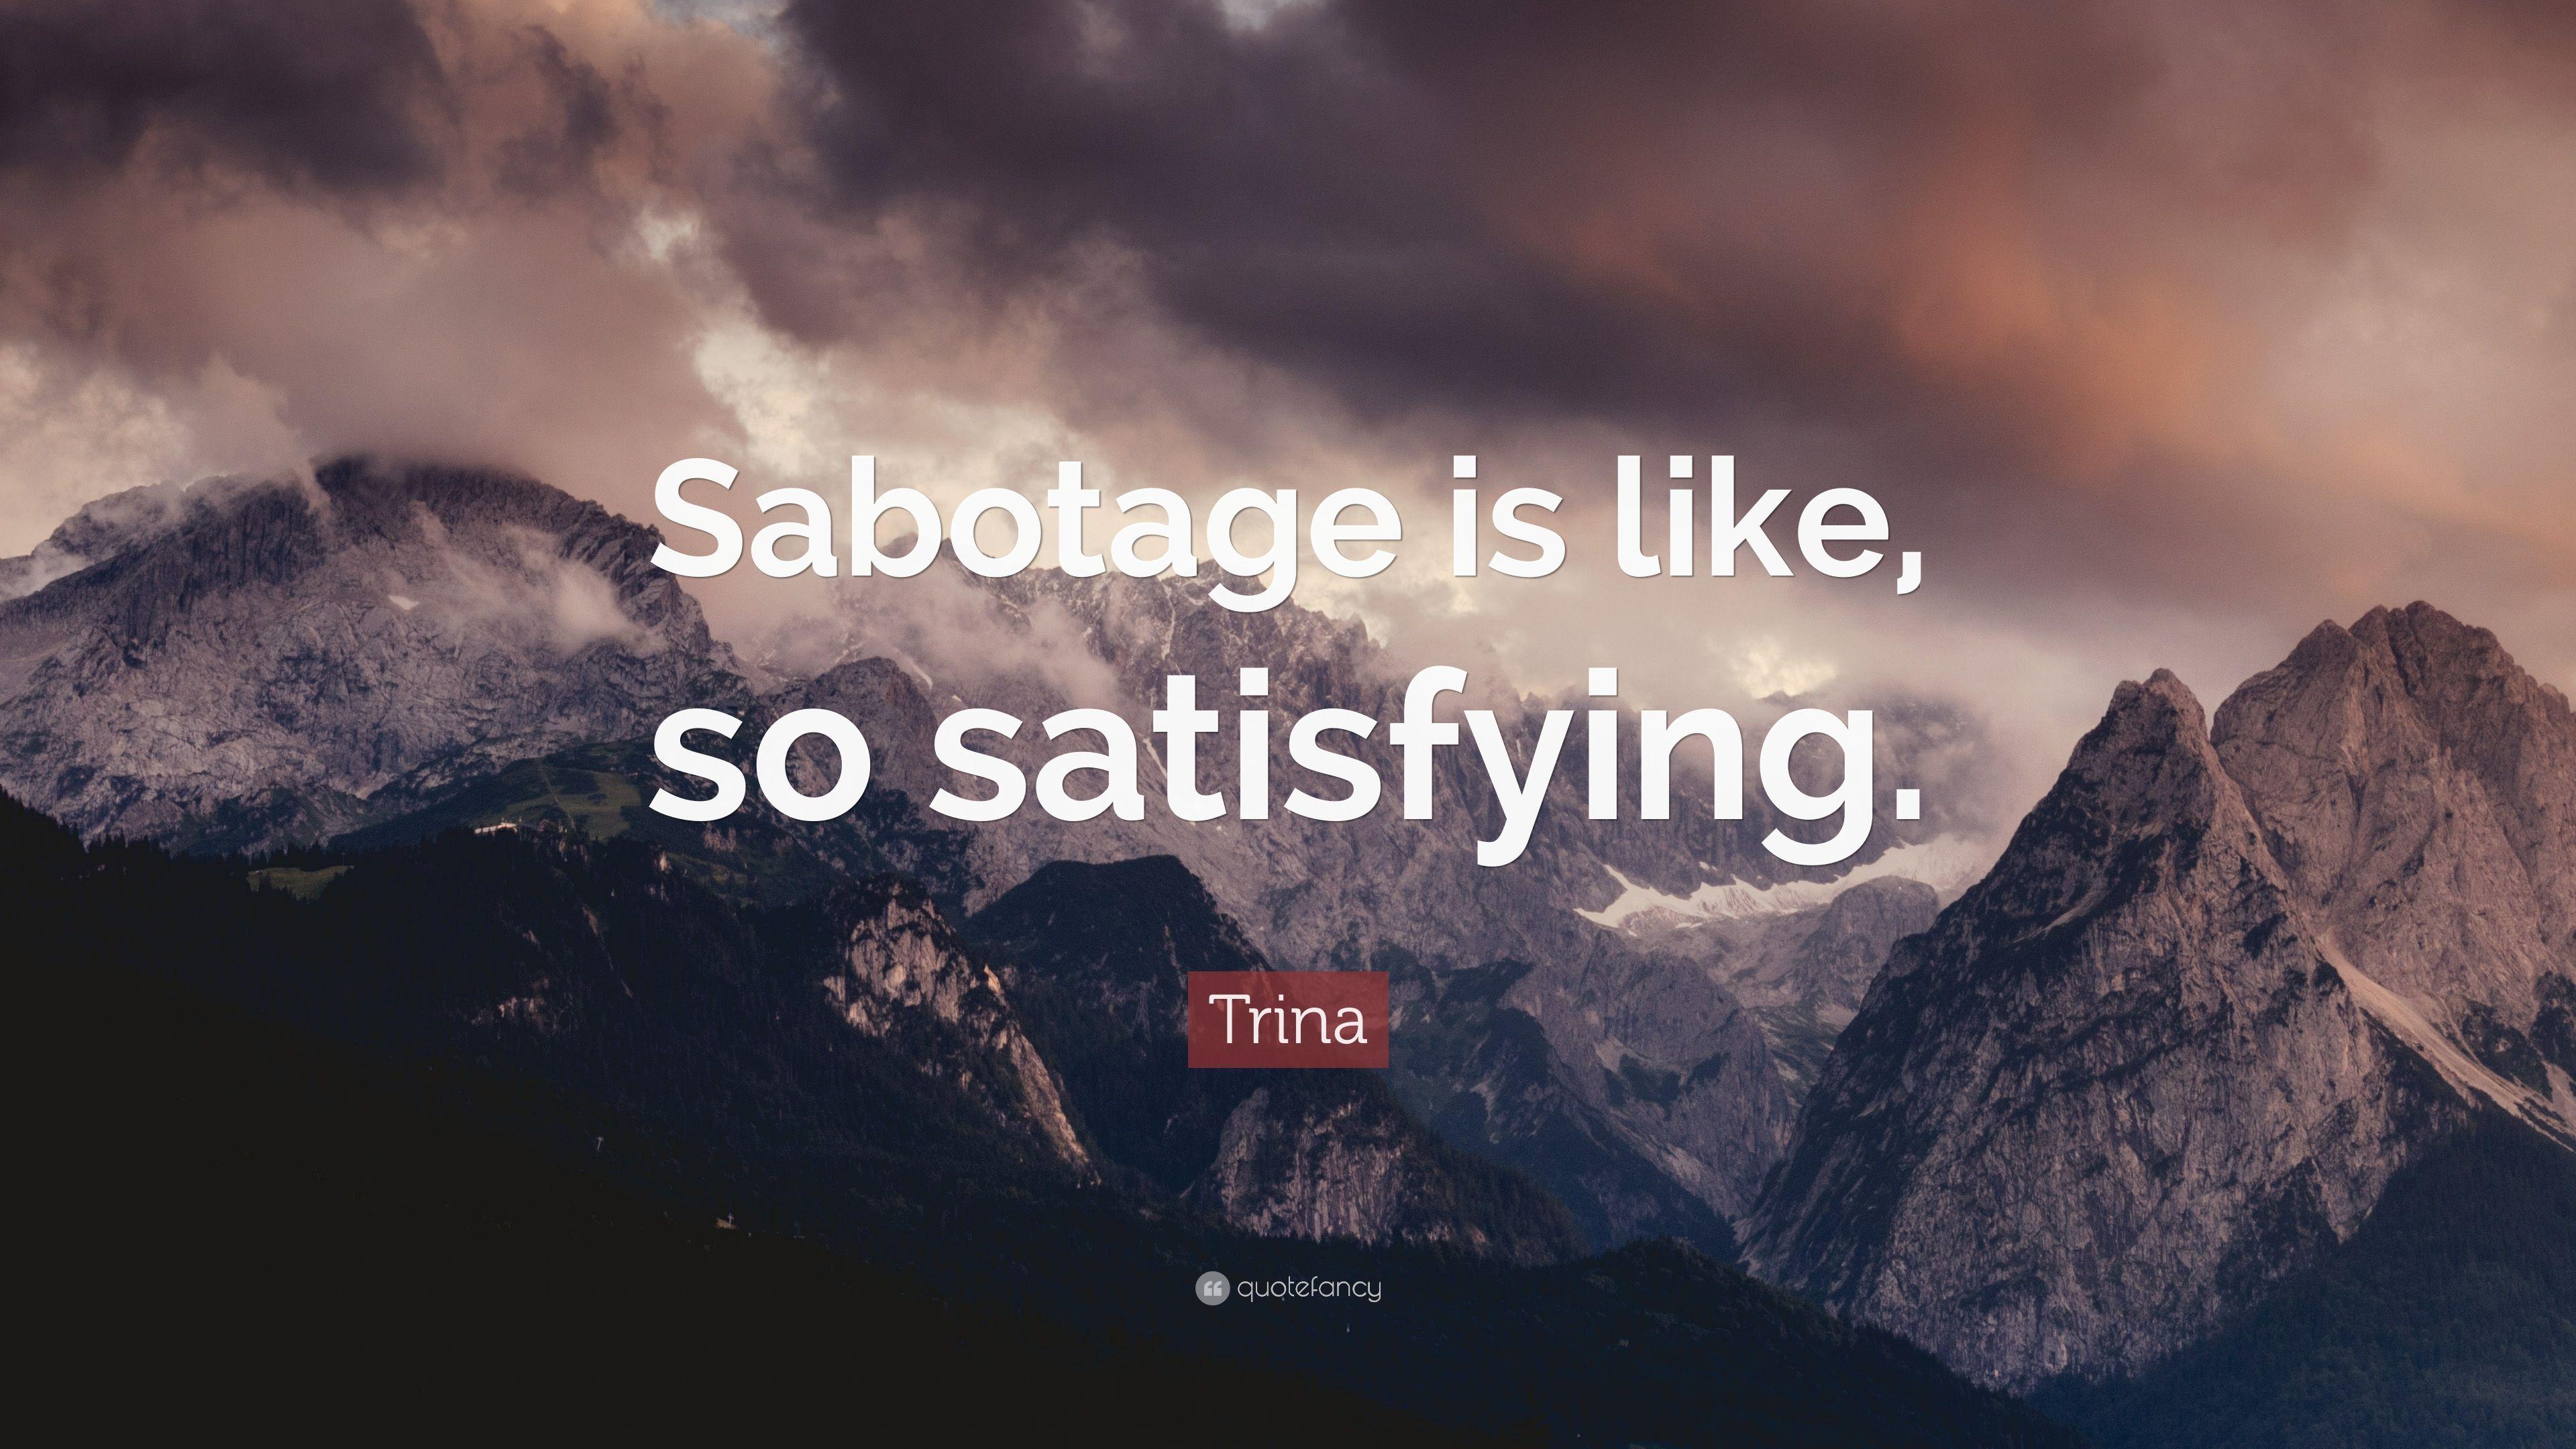 Trina Quote: “Sabotage is like, so satisfying.” 7 wallpaper